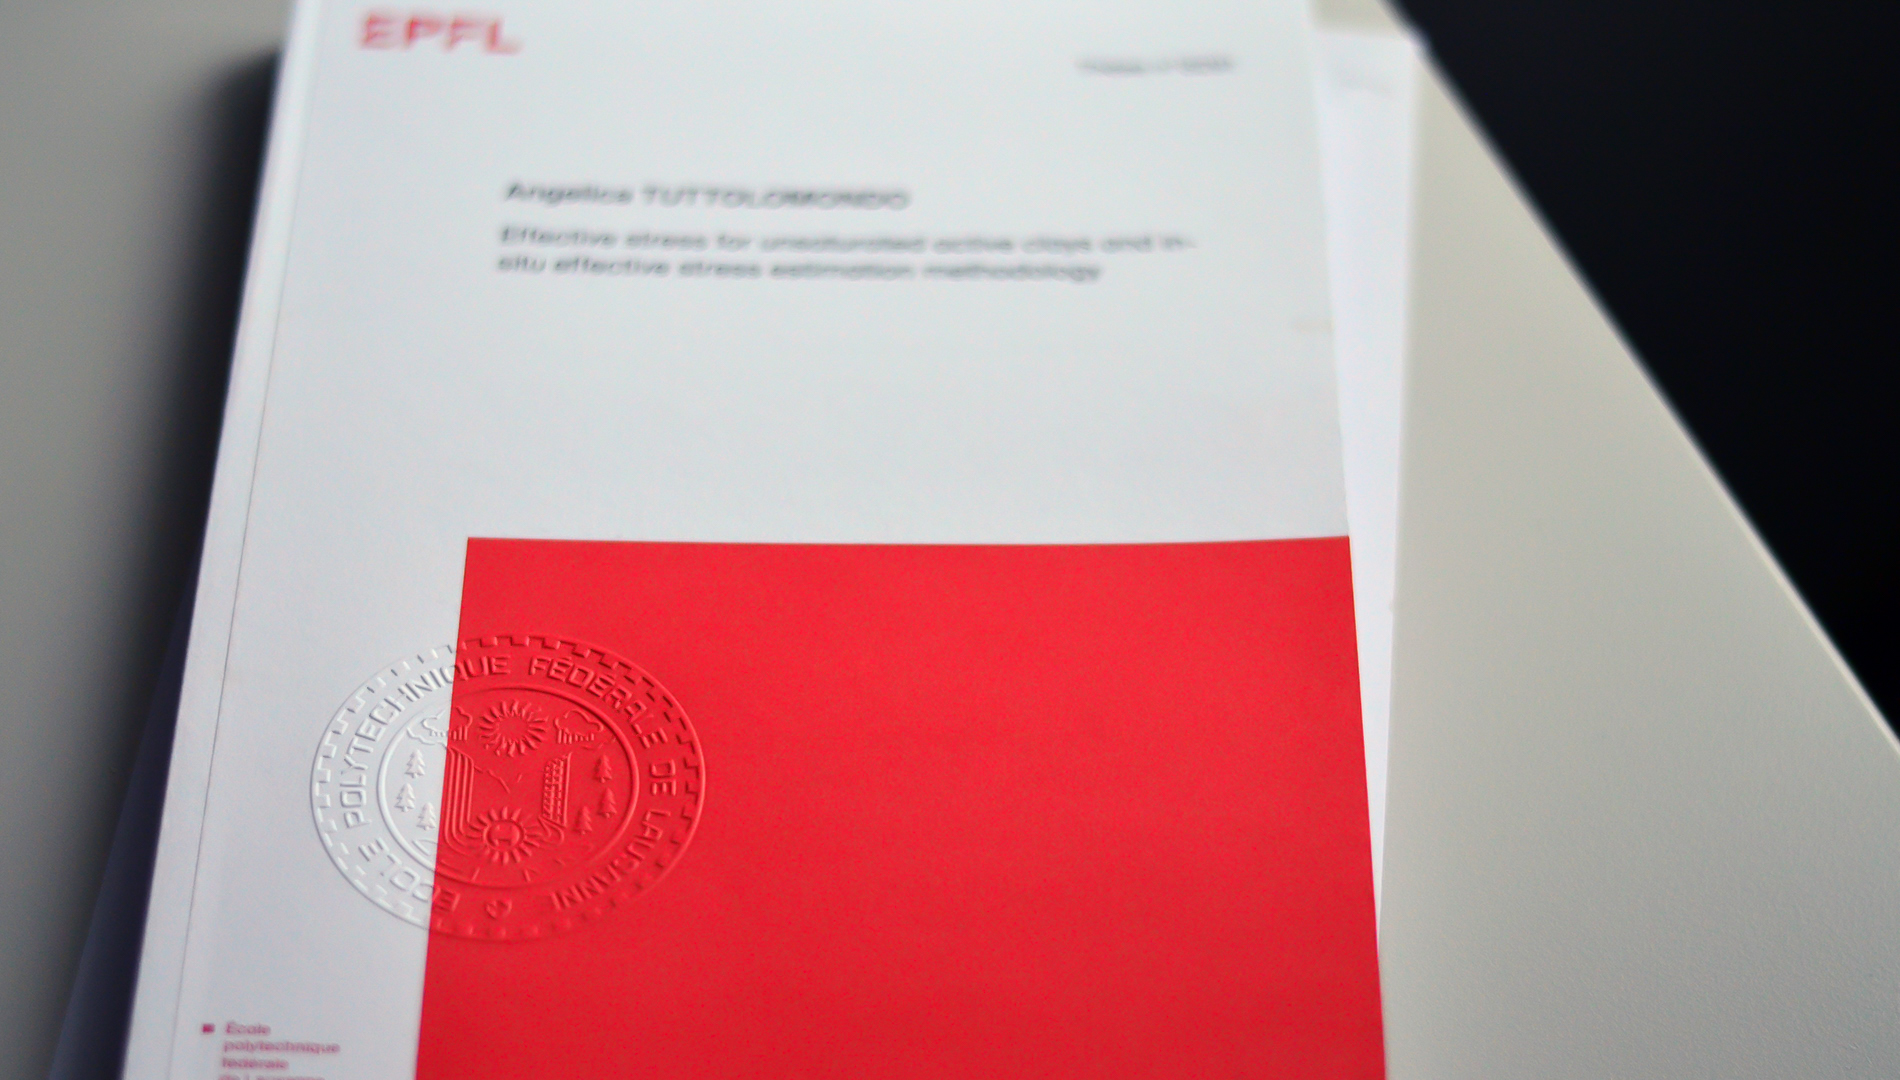 epfl thesis guidelines